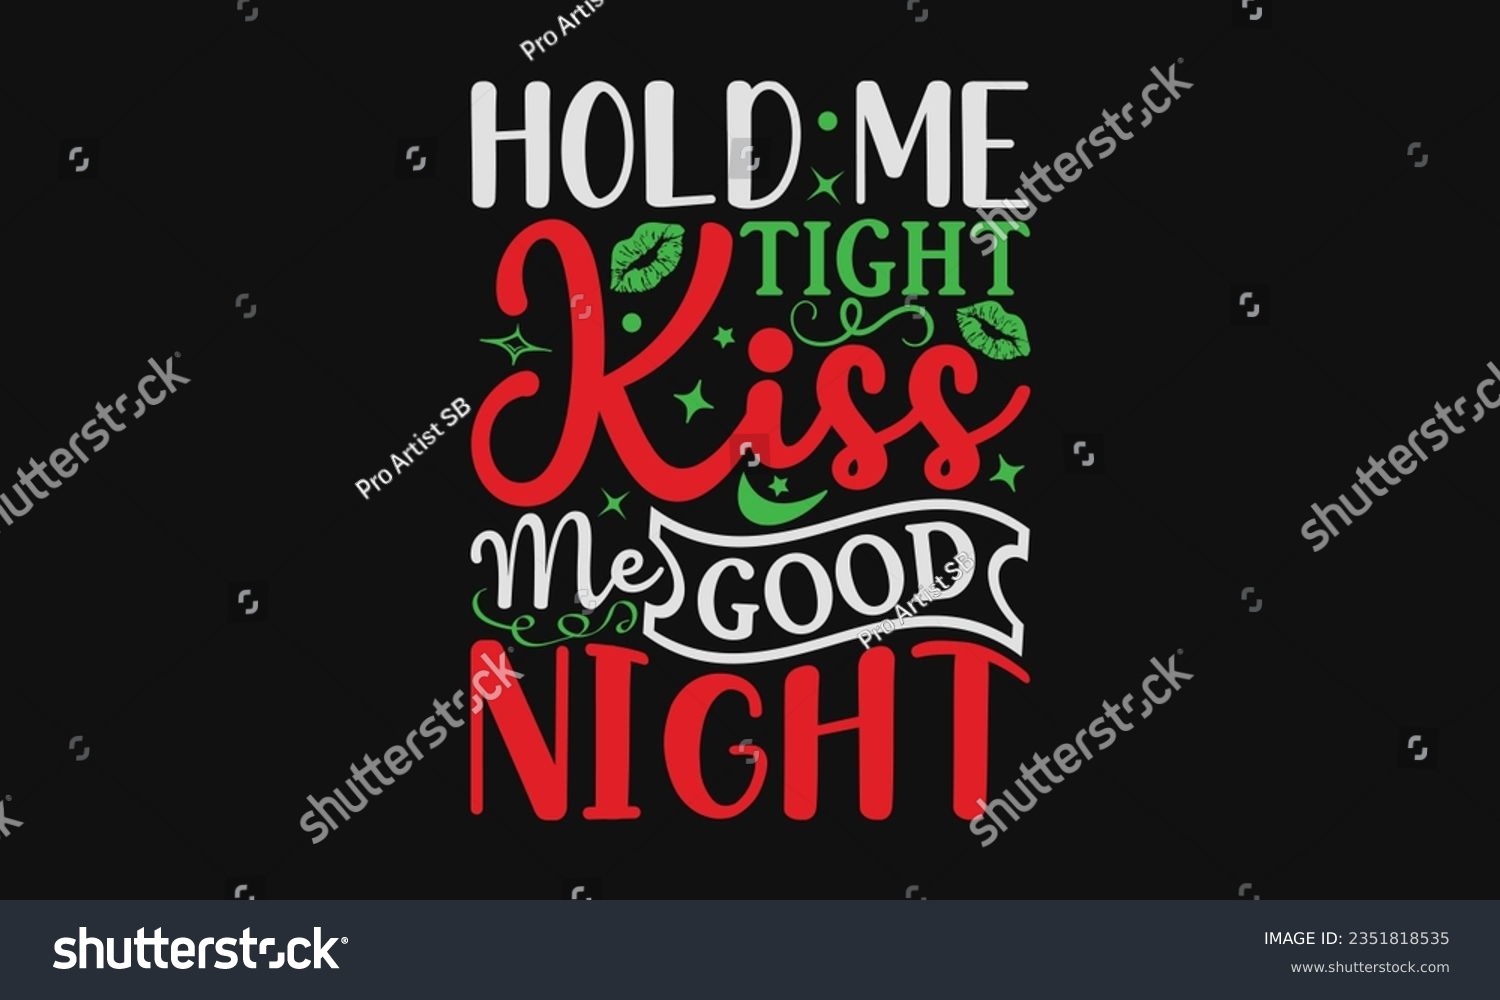 SVG of Hold me tight kiss me good night - Baby SVG Design Sublimation, Kids Lettering Design, Vector EPS Editable Files, Isolated On White Background, Prints On T-Shirts And Bags, Posters, Cards. svg